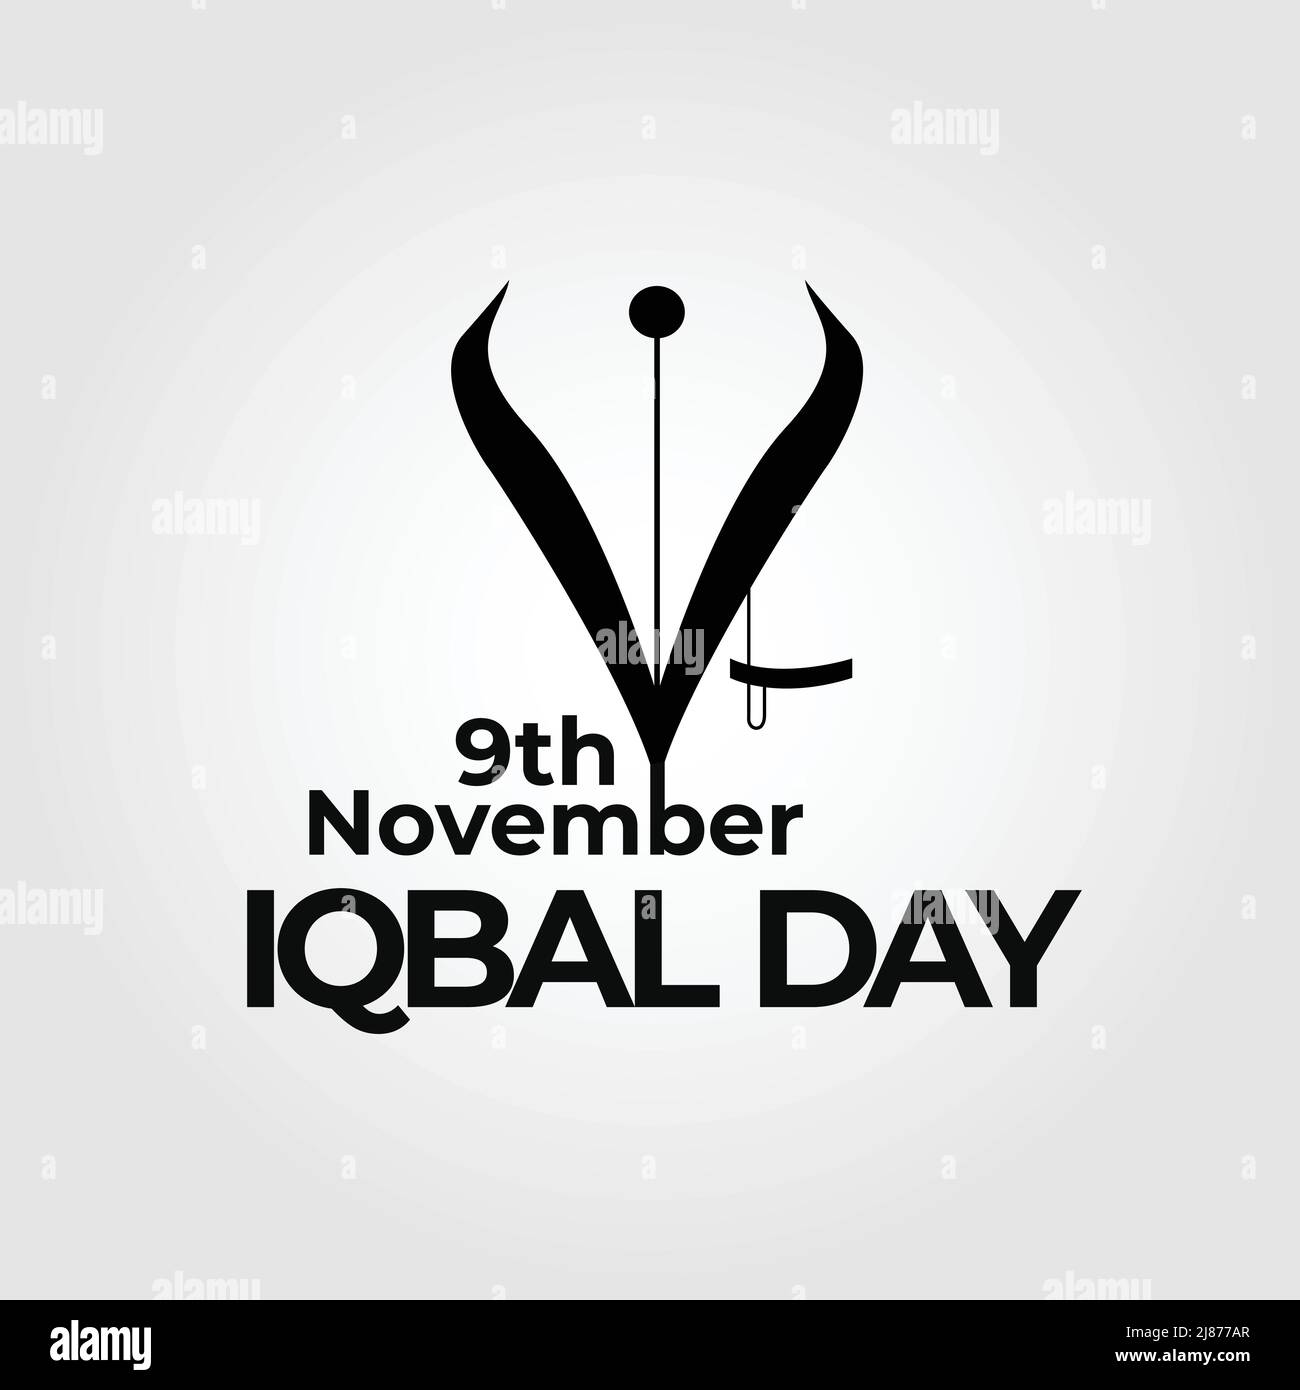 9th November iqbal day with Pen needle in black color Stock Vector